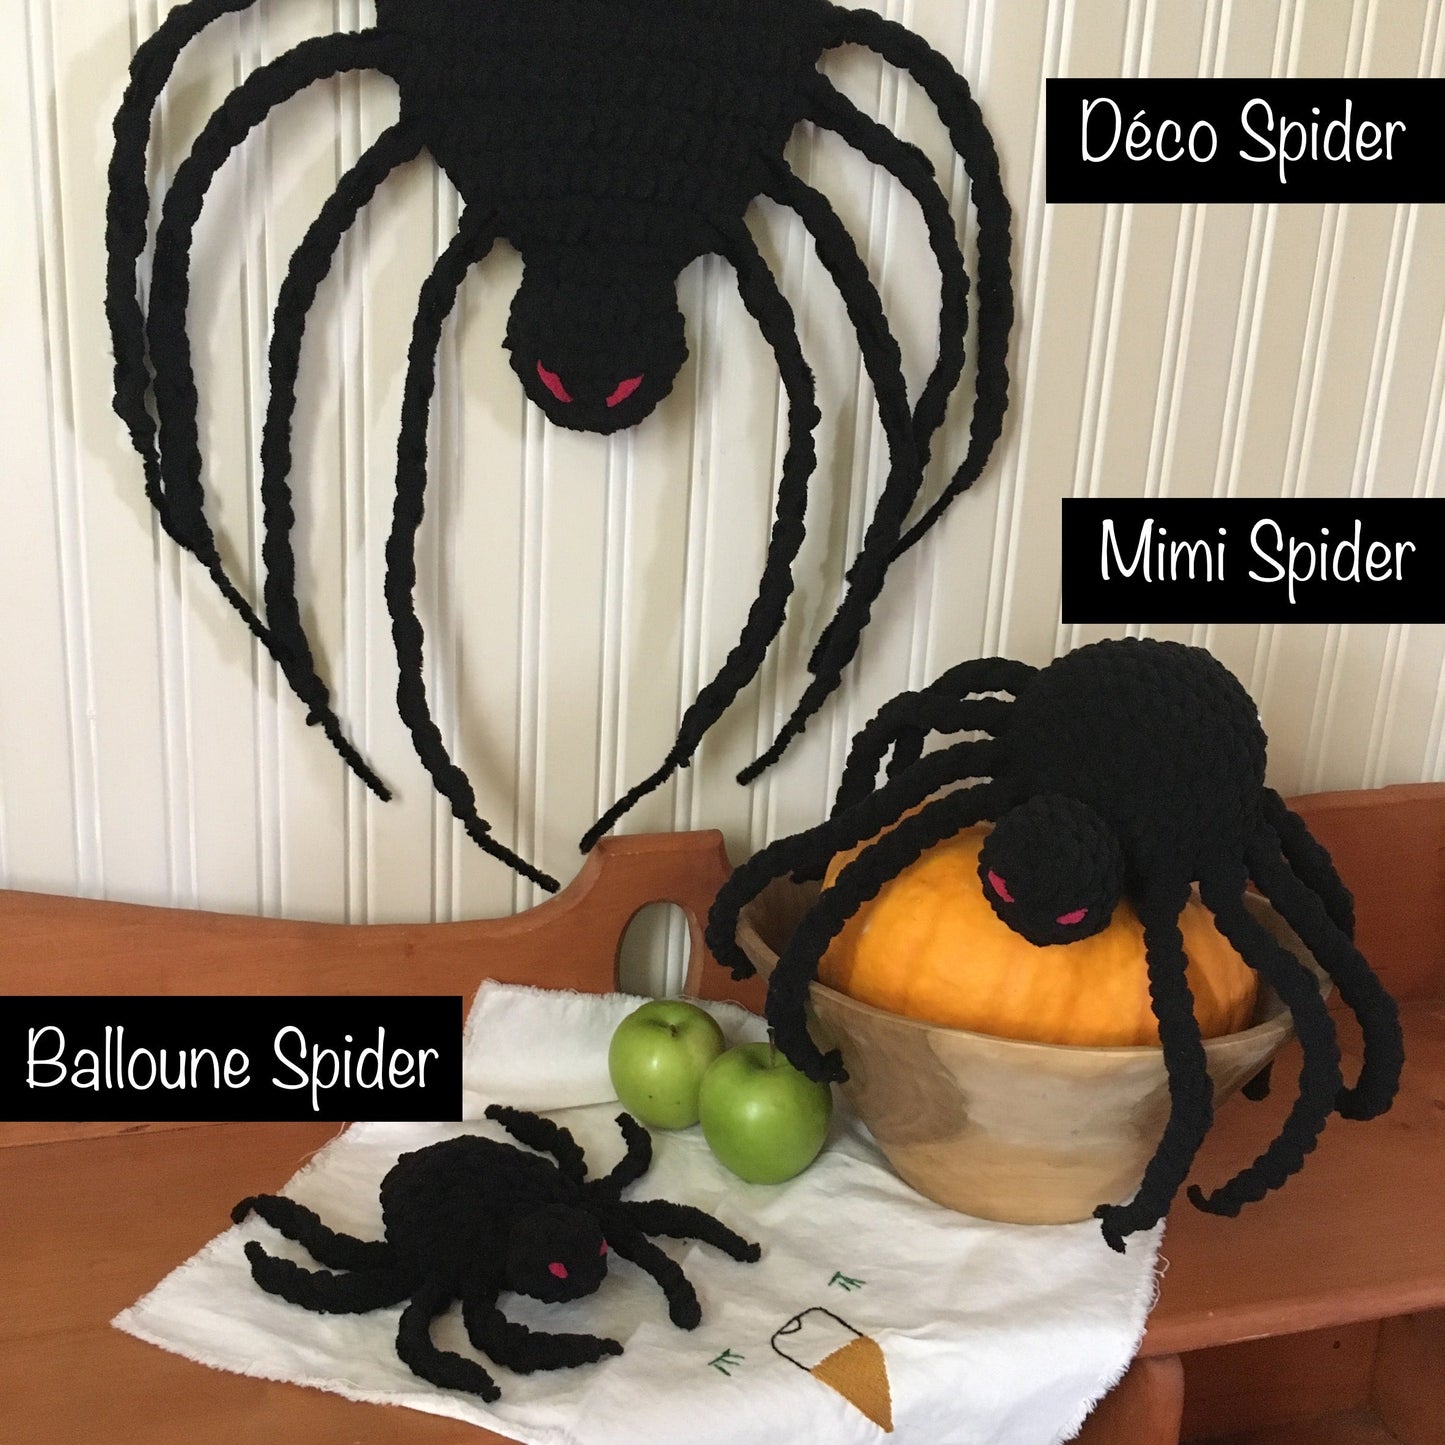 MIMI SPIDER TUTORIAL to Download - French and English PDF